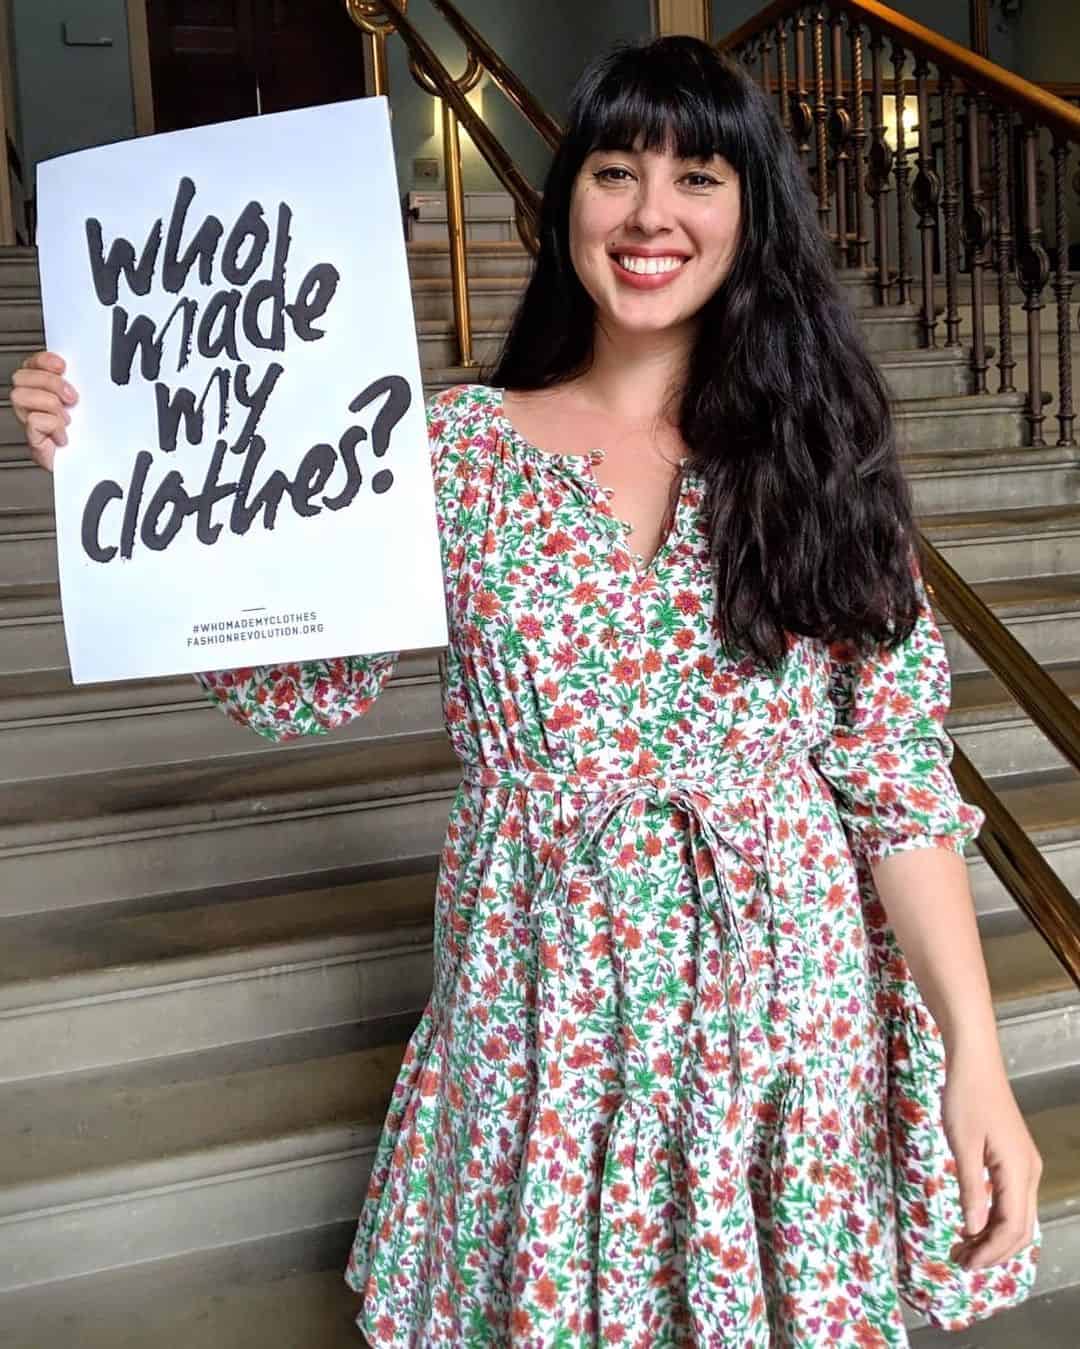 A woman promoting sustainable clothing by holding up a sign questioning its origin.